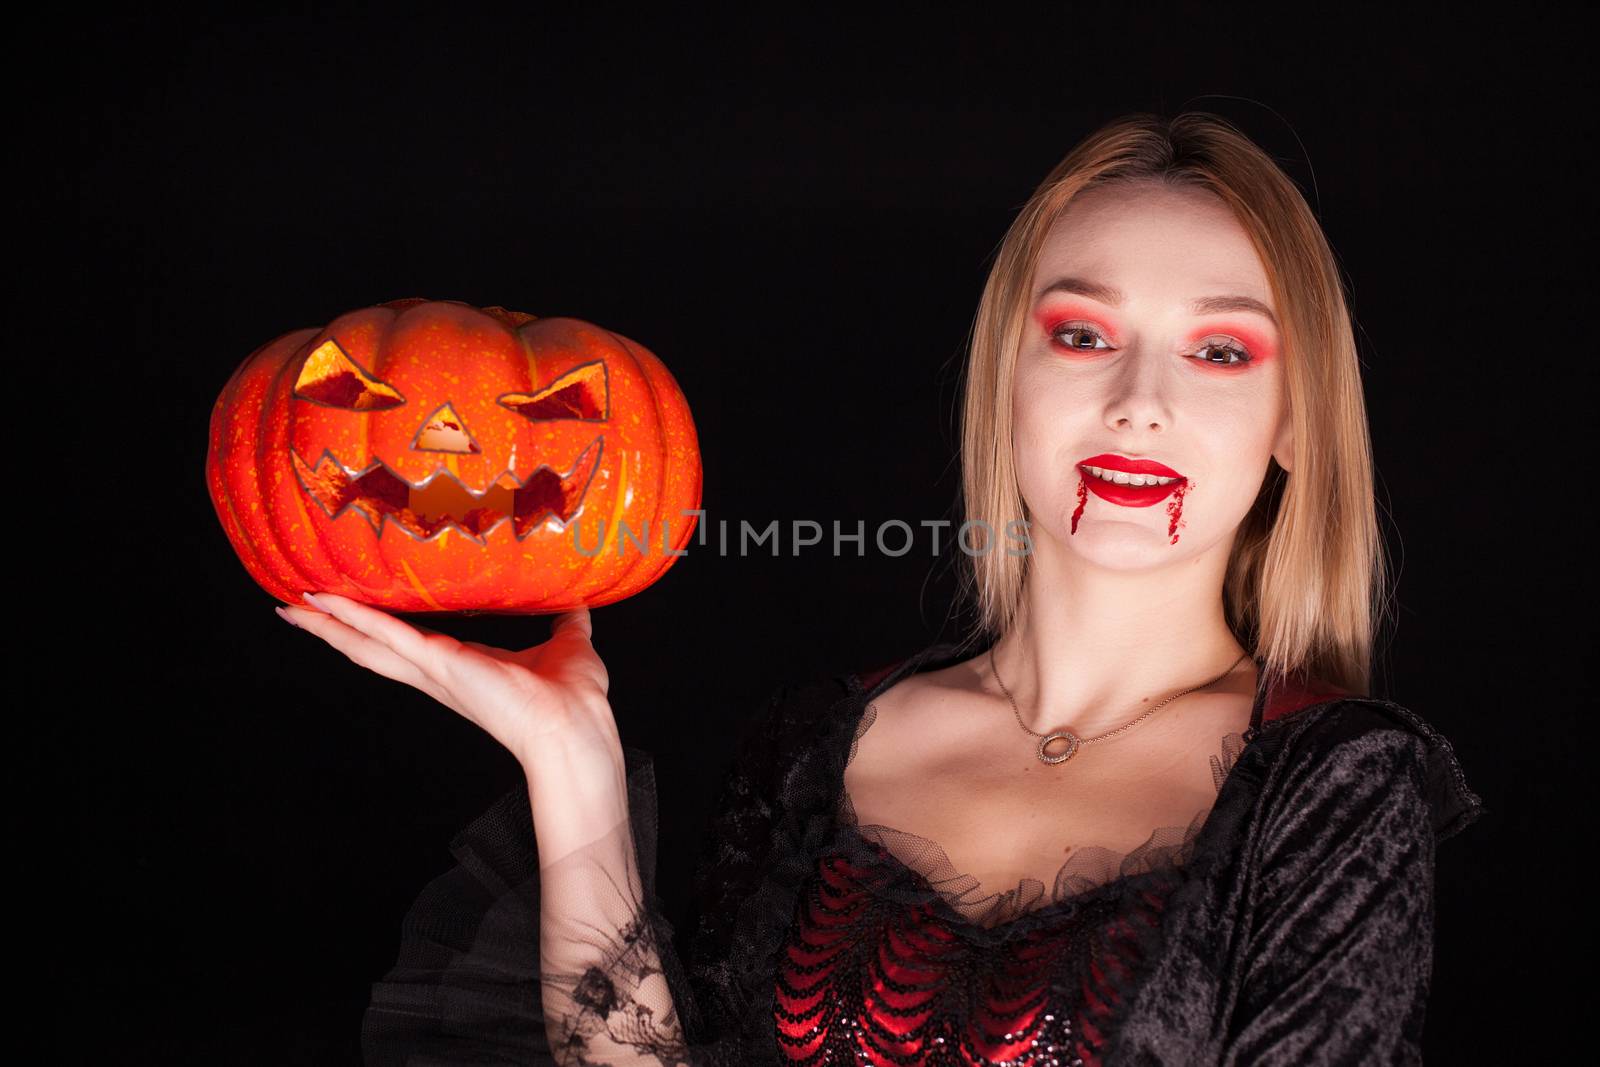 Portrait of beautiful woman dressed up like a vampire with bloody lips holding a pumpkin over black background.